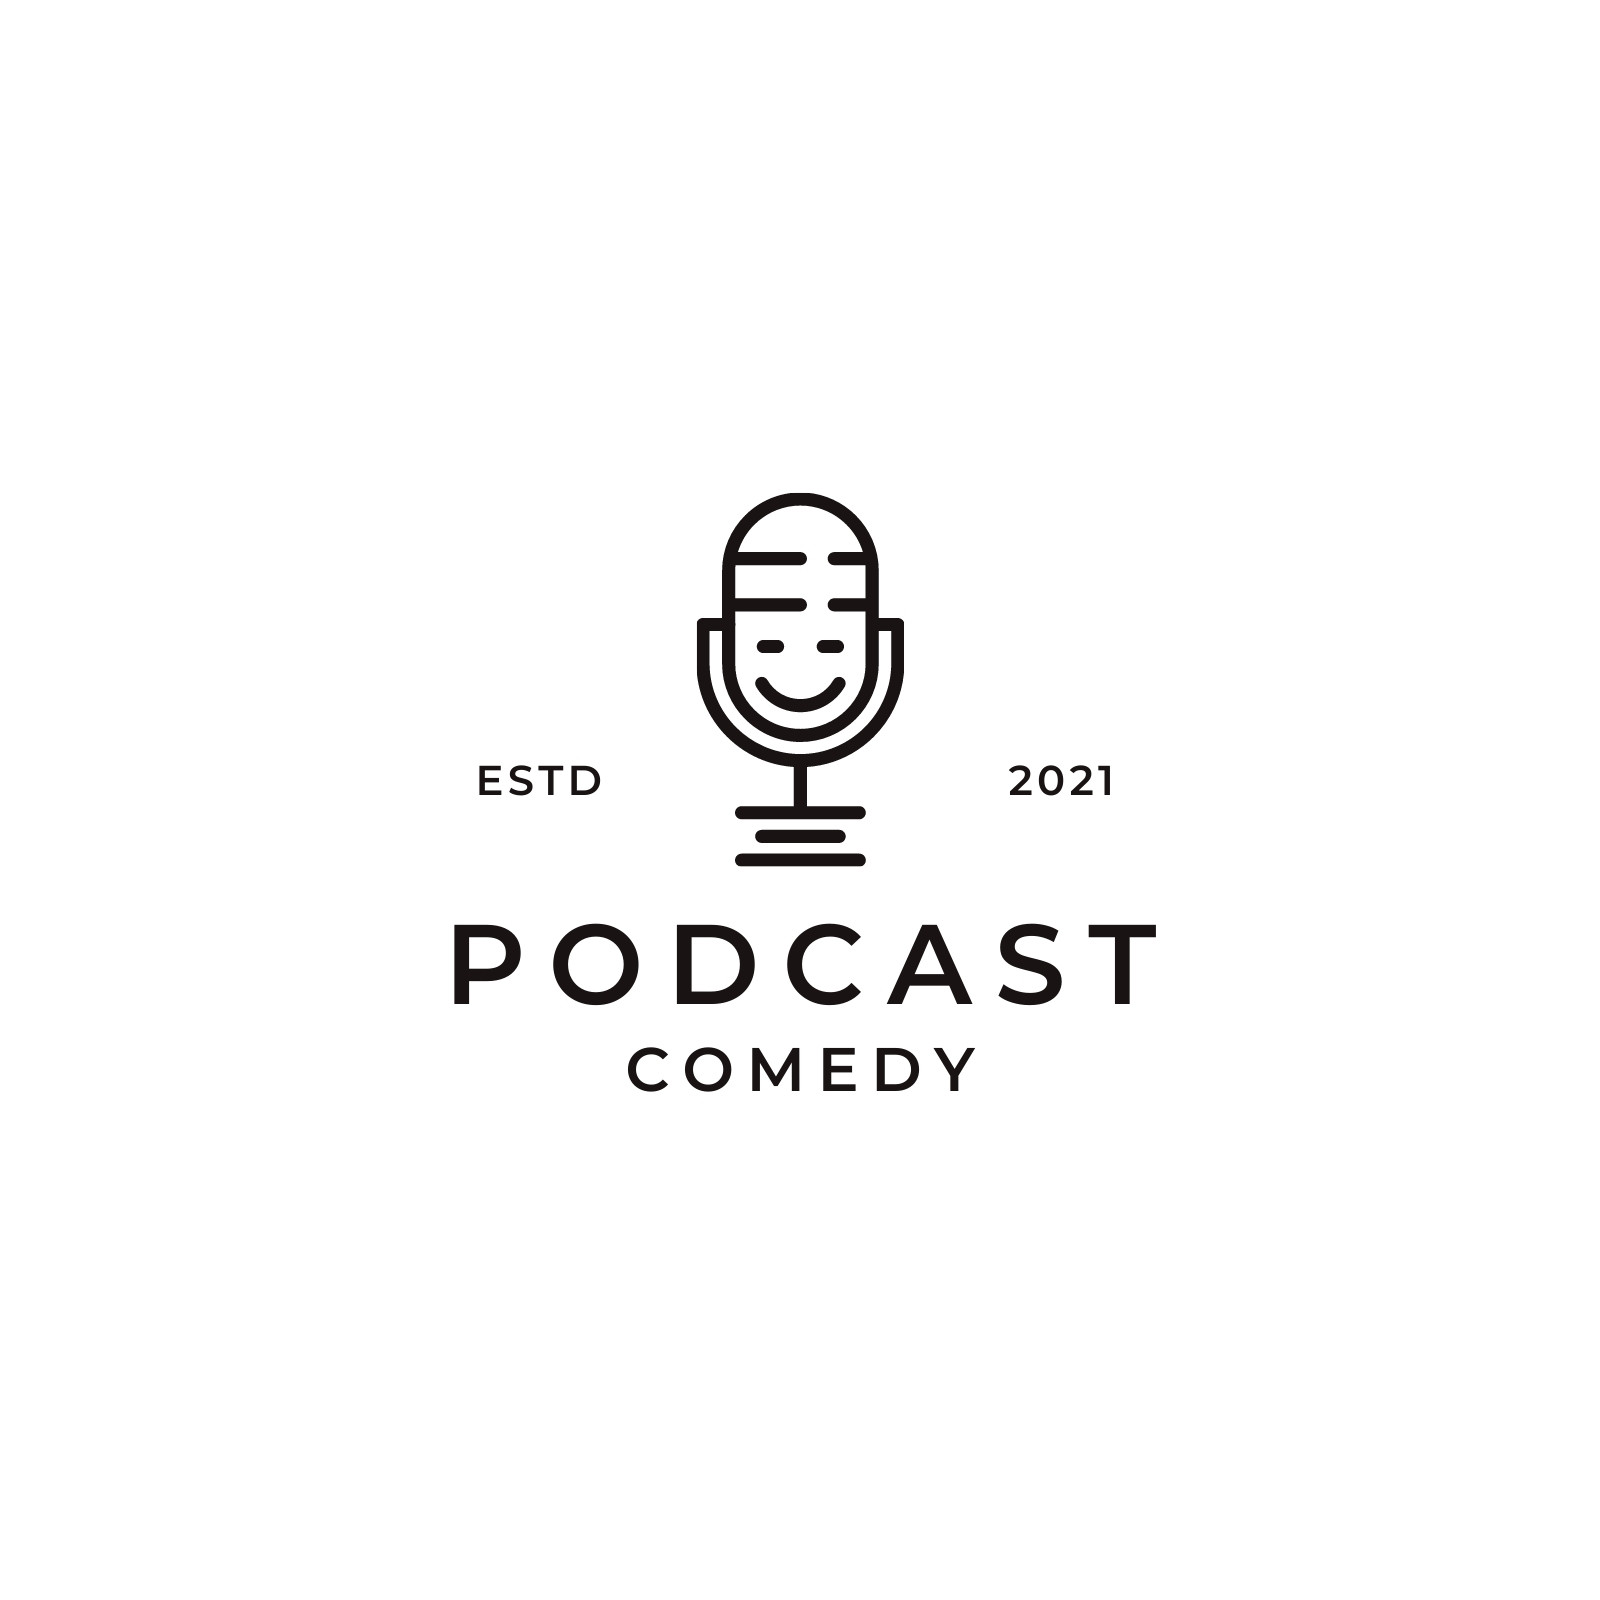 Free and customizable podcast templates